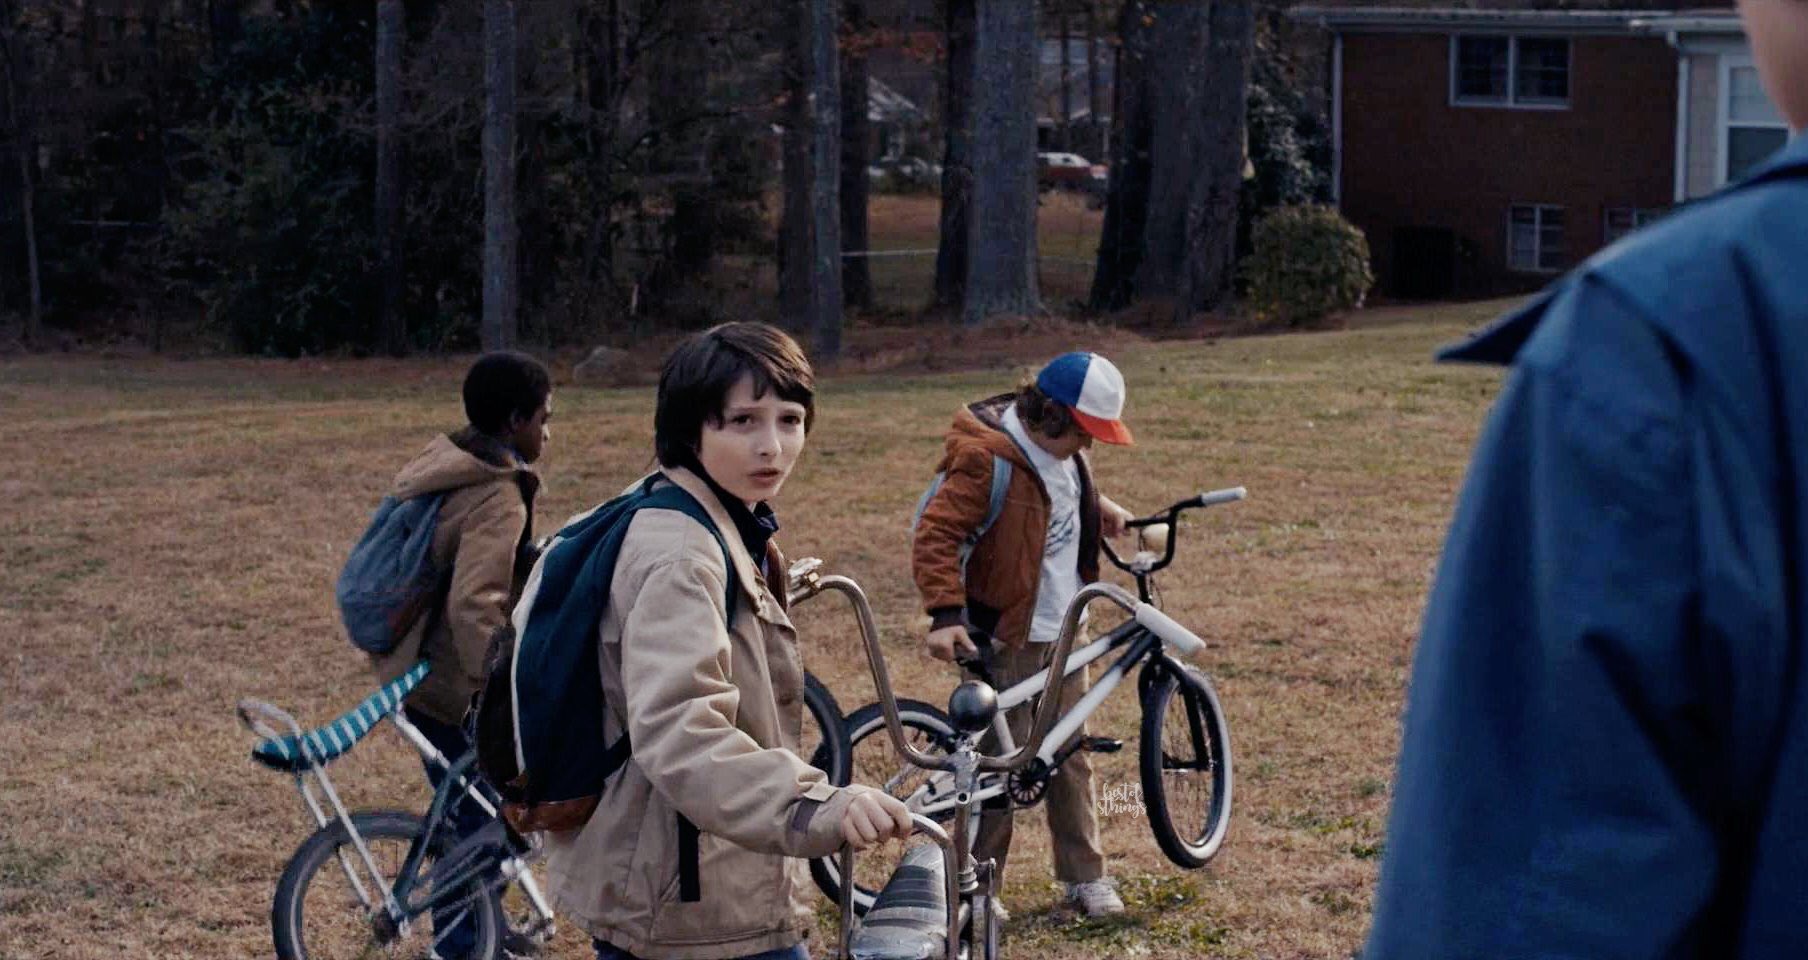 MIKE AND ELEVEN (STRANGER THINGS SEASON 1 & 3) Another parallels